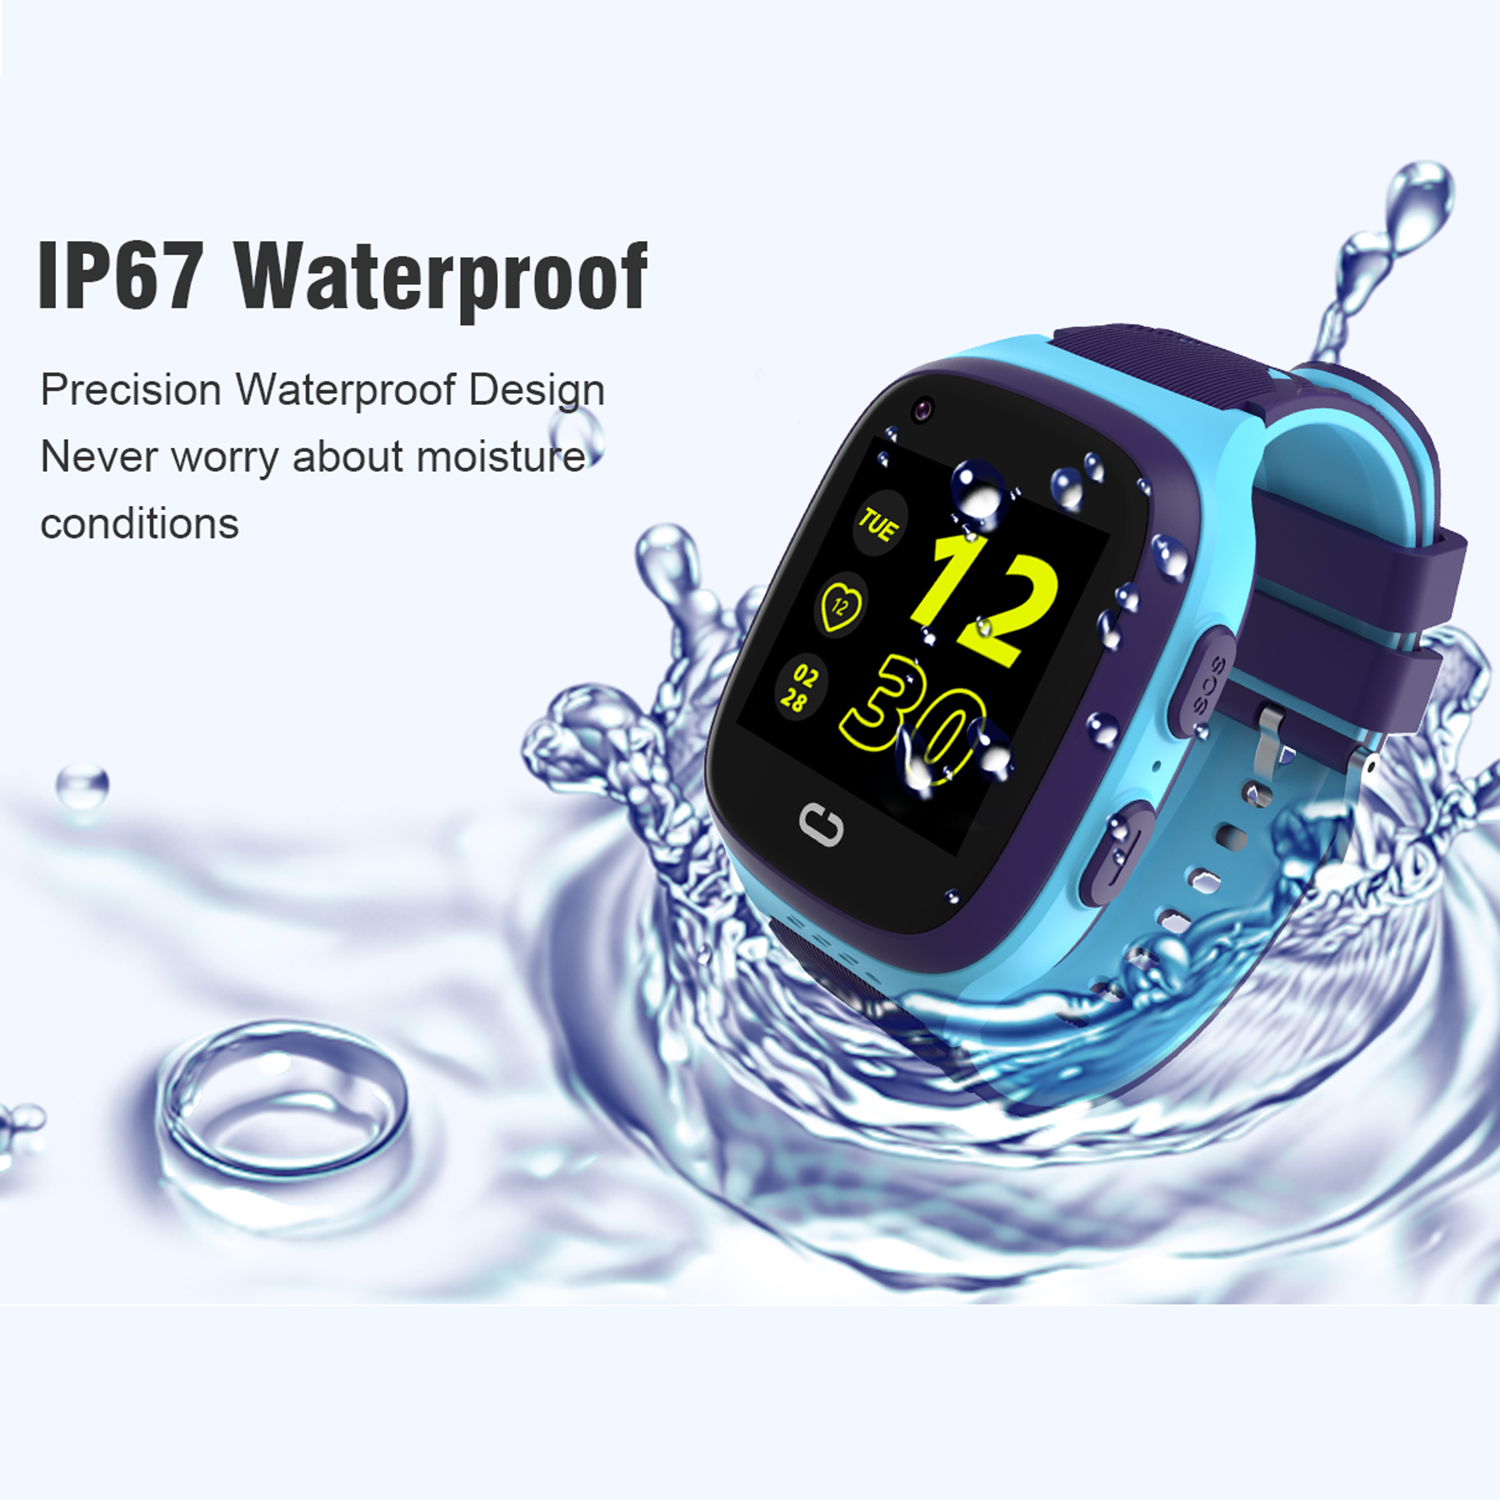 4G Waterproof safety Android Lady Kids Smart GPS Tracker watch 